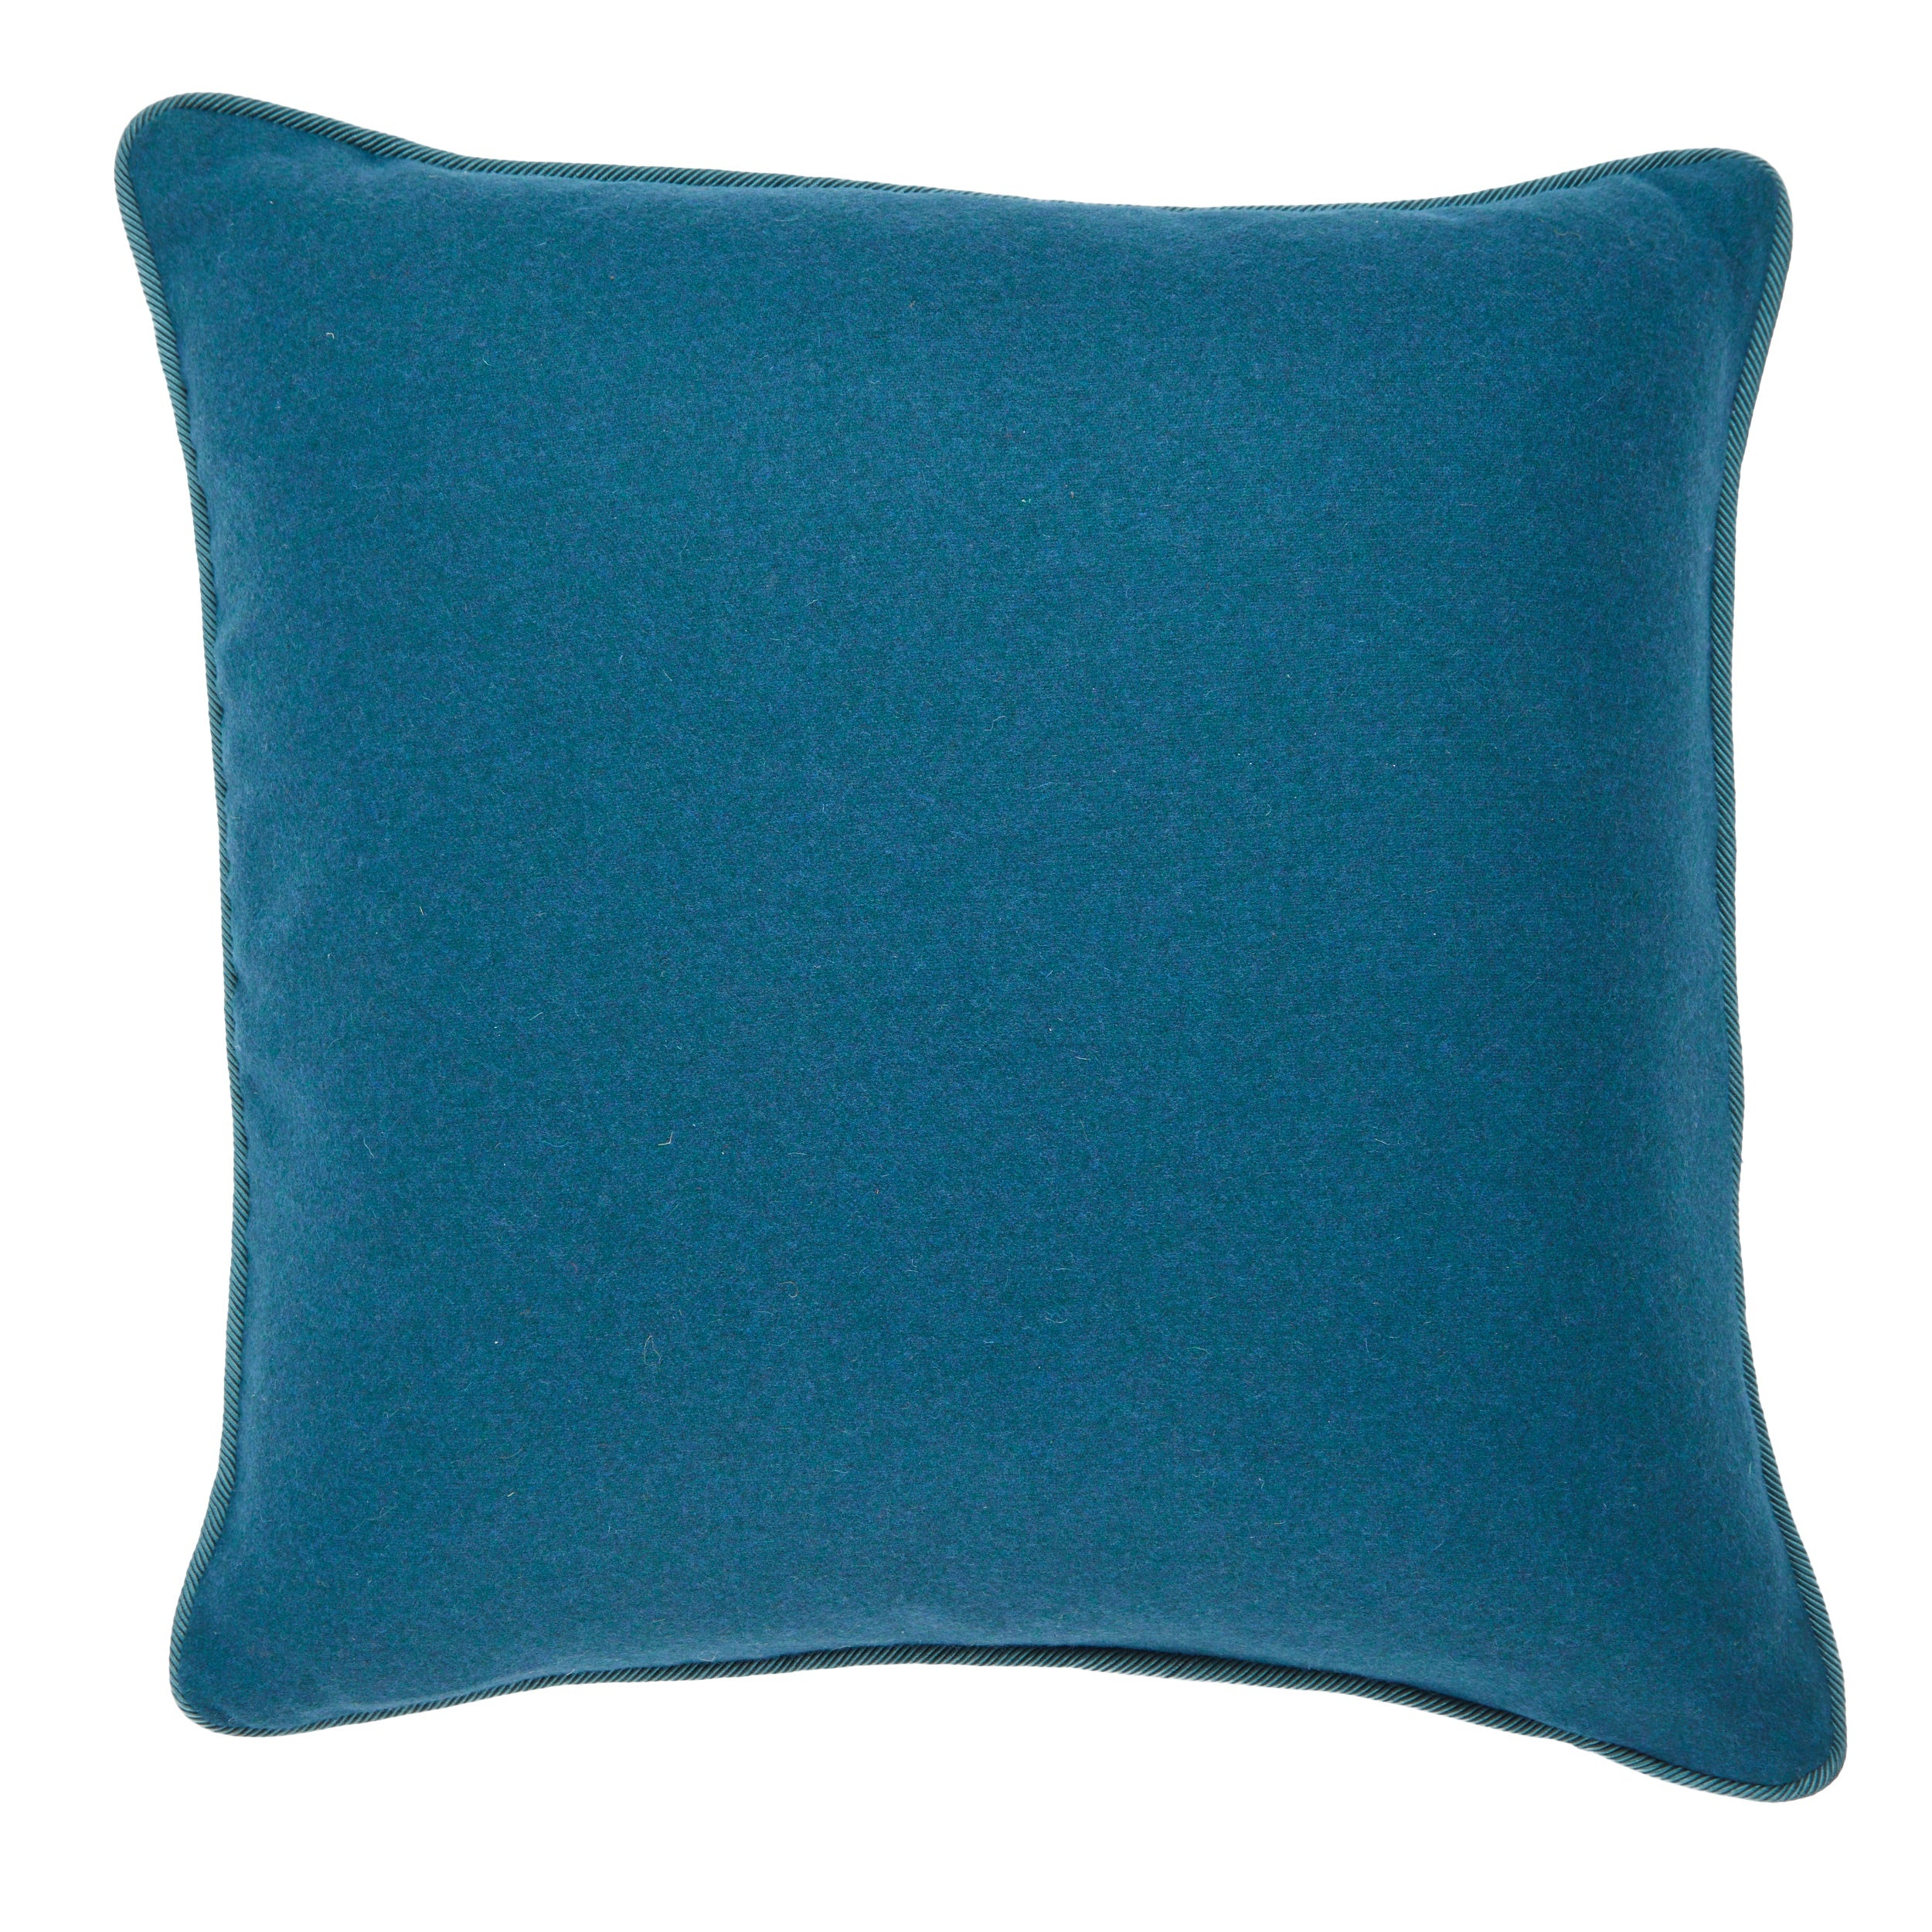 A Cushion made from Richly Coloured 20th Century English Needlework with Dark Teal Wool Piping